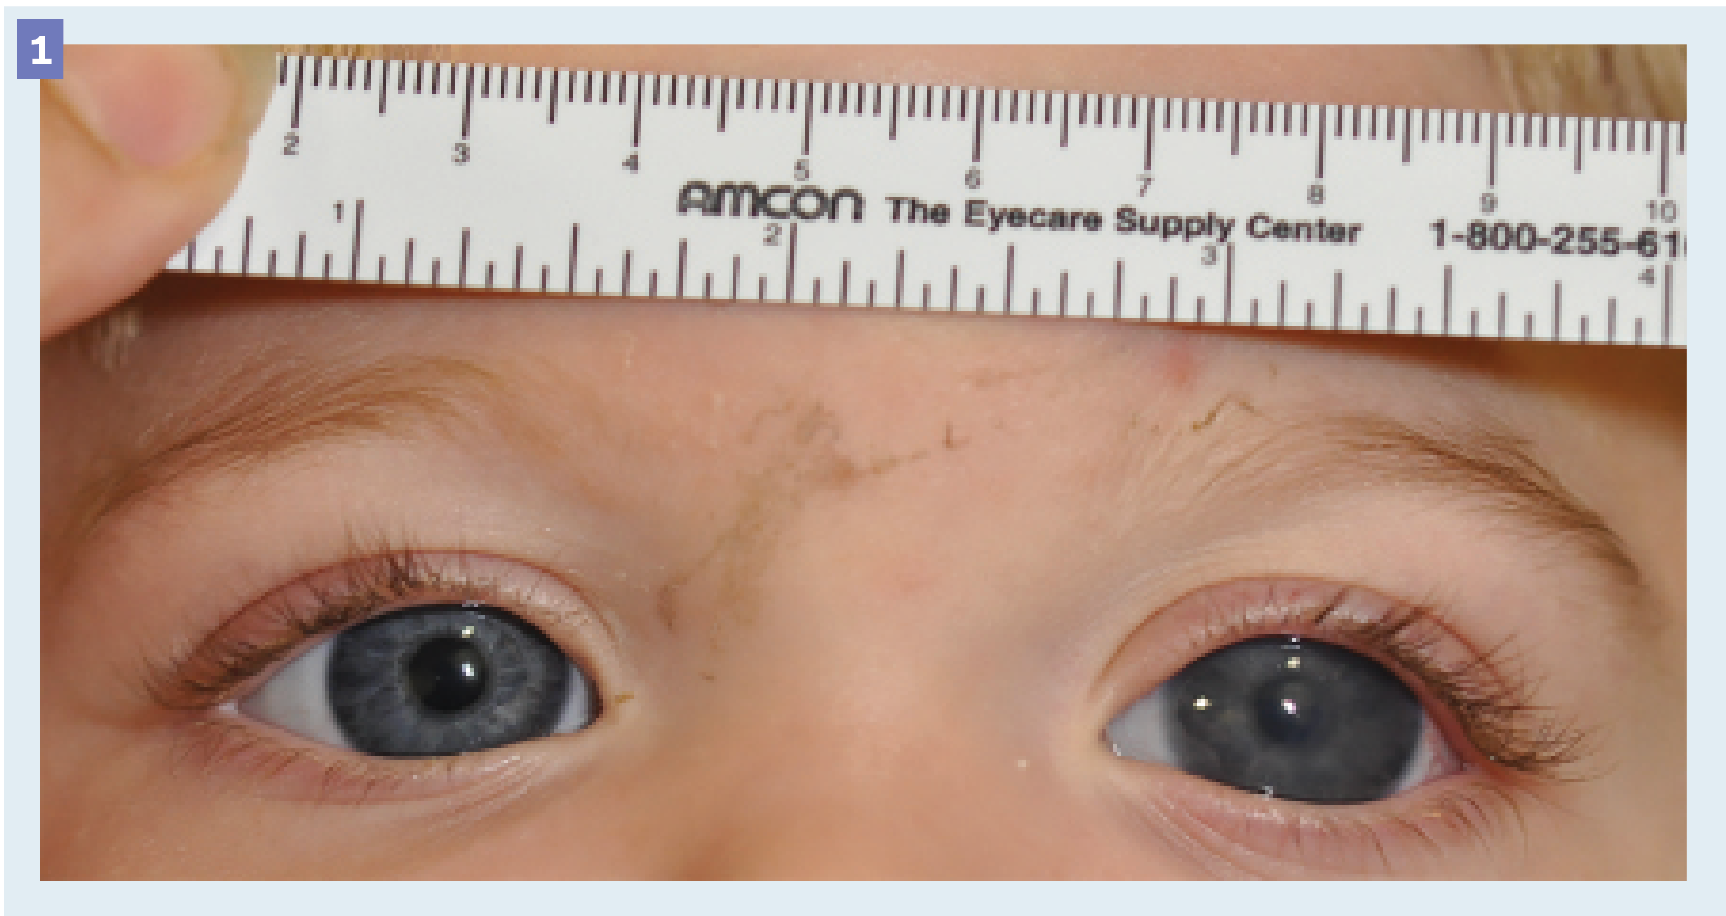 Figure 1. Pediatric Congenital Glaucoma. A photo of a 15-month-old male patient with congenital glaucoma shows an enlarged cornea with clouding of left eye.